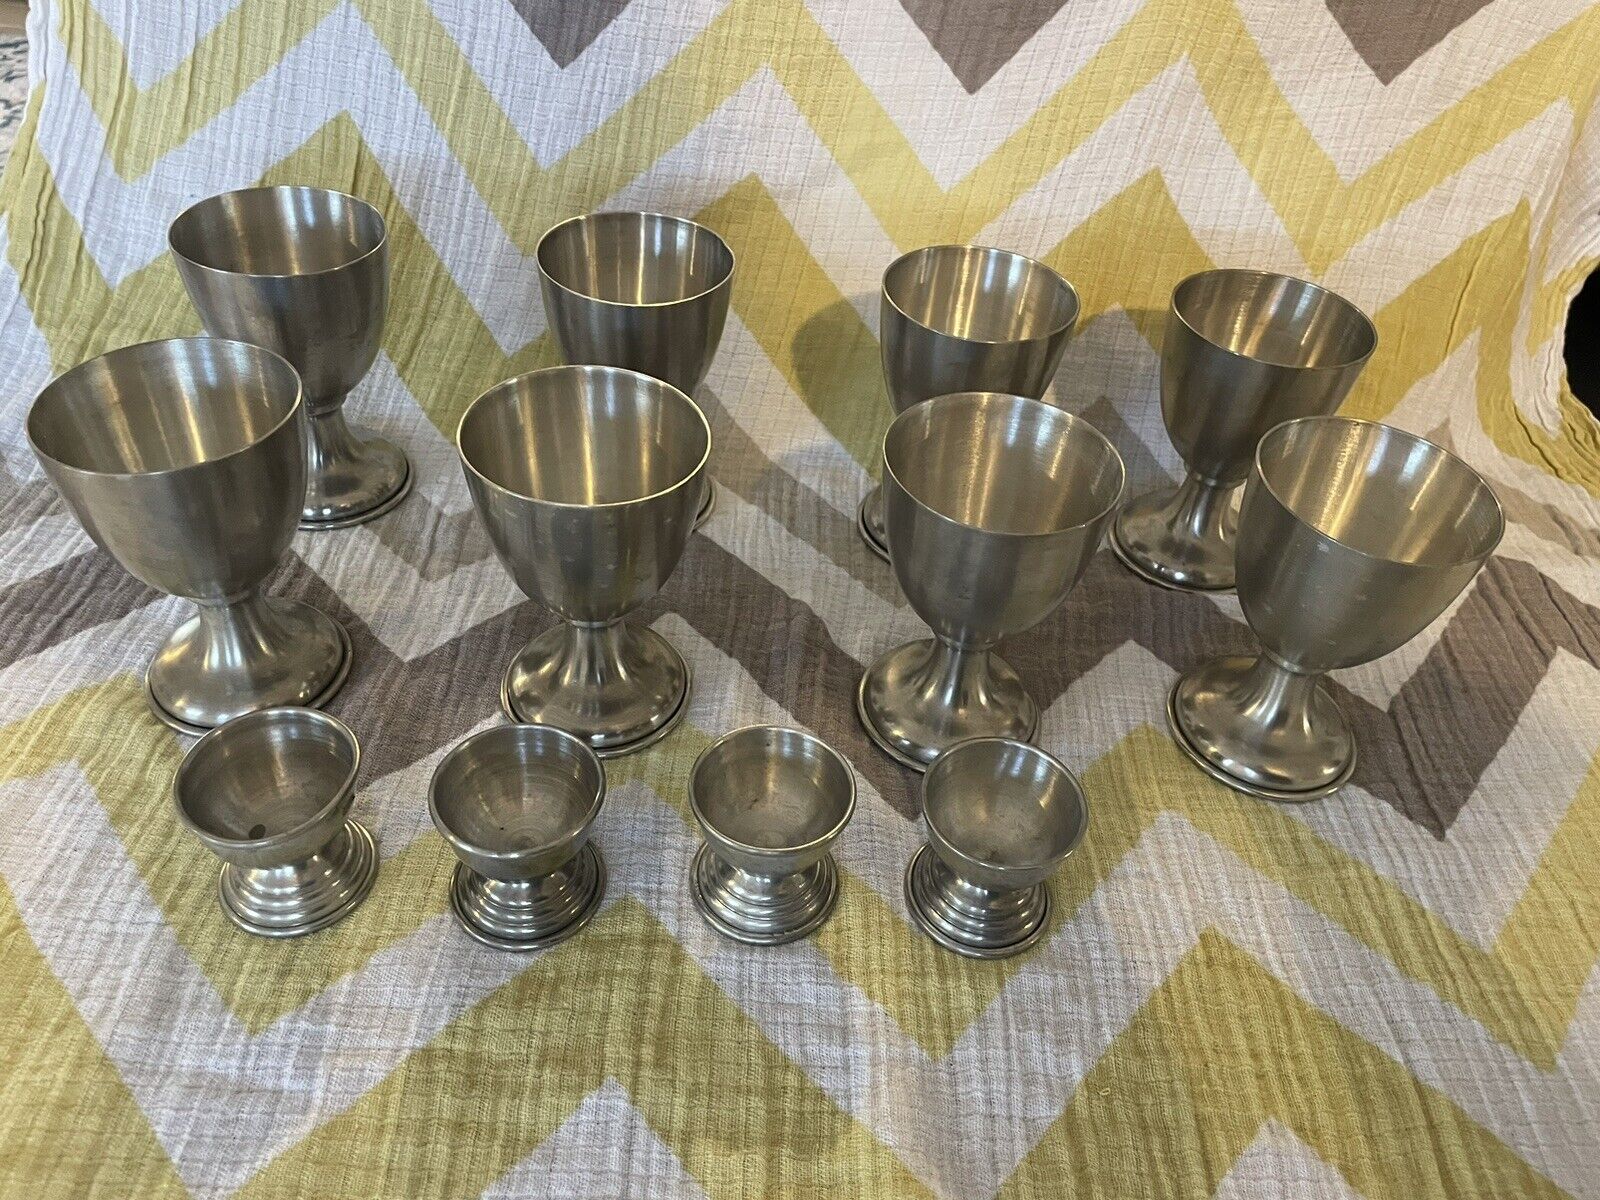 VINTAGE WMF Rein Zinn PEWTER CUP SET OF 8 Cups & 4 Egg Cups